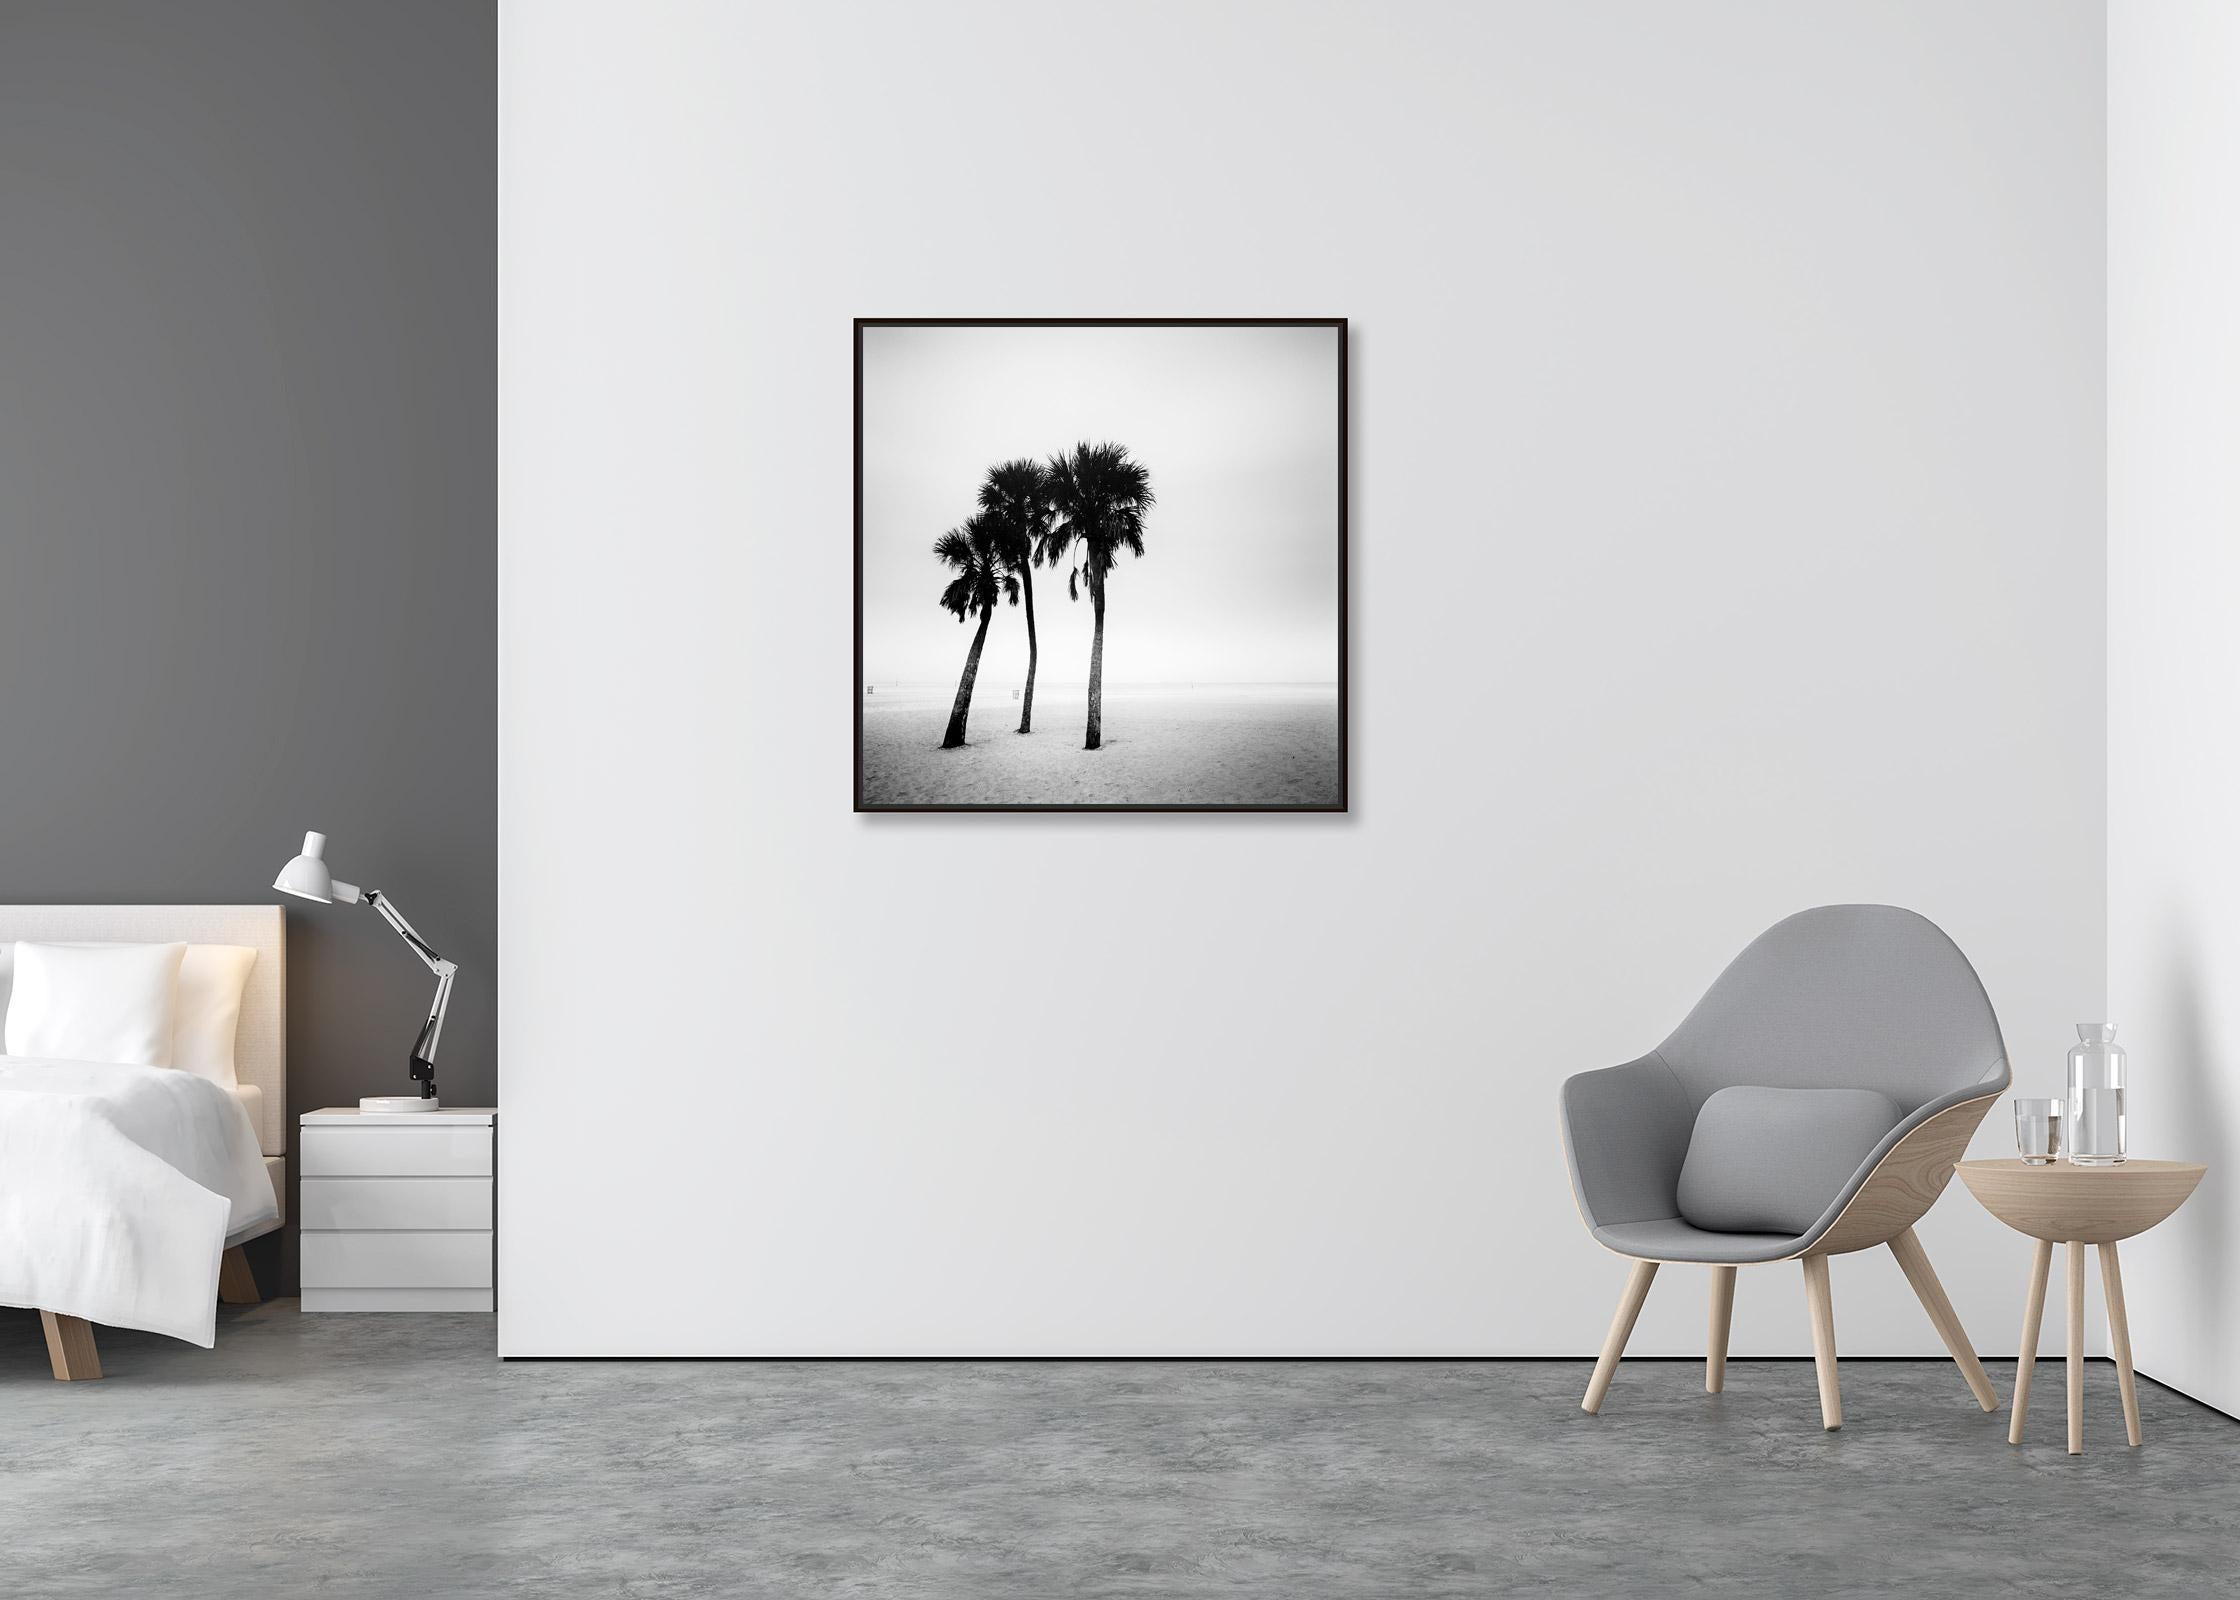 Palm Trees, lonley beach, Florida, USA, black and white photography, landscape - Contemporary Photograph by Gerald Berghammer